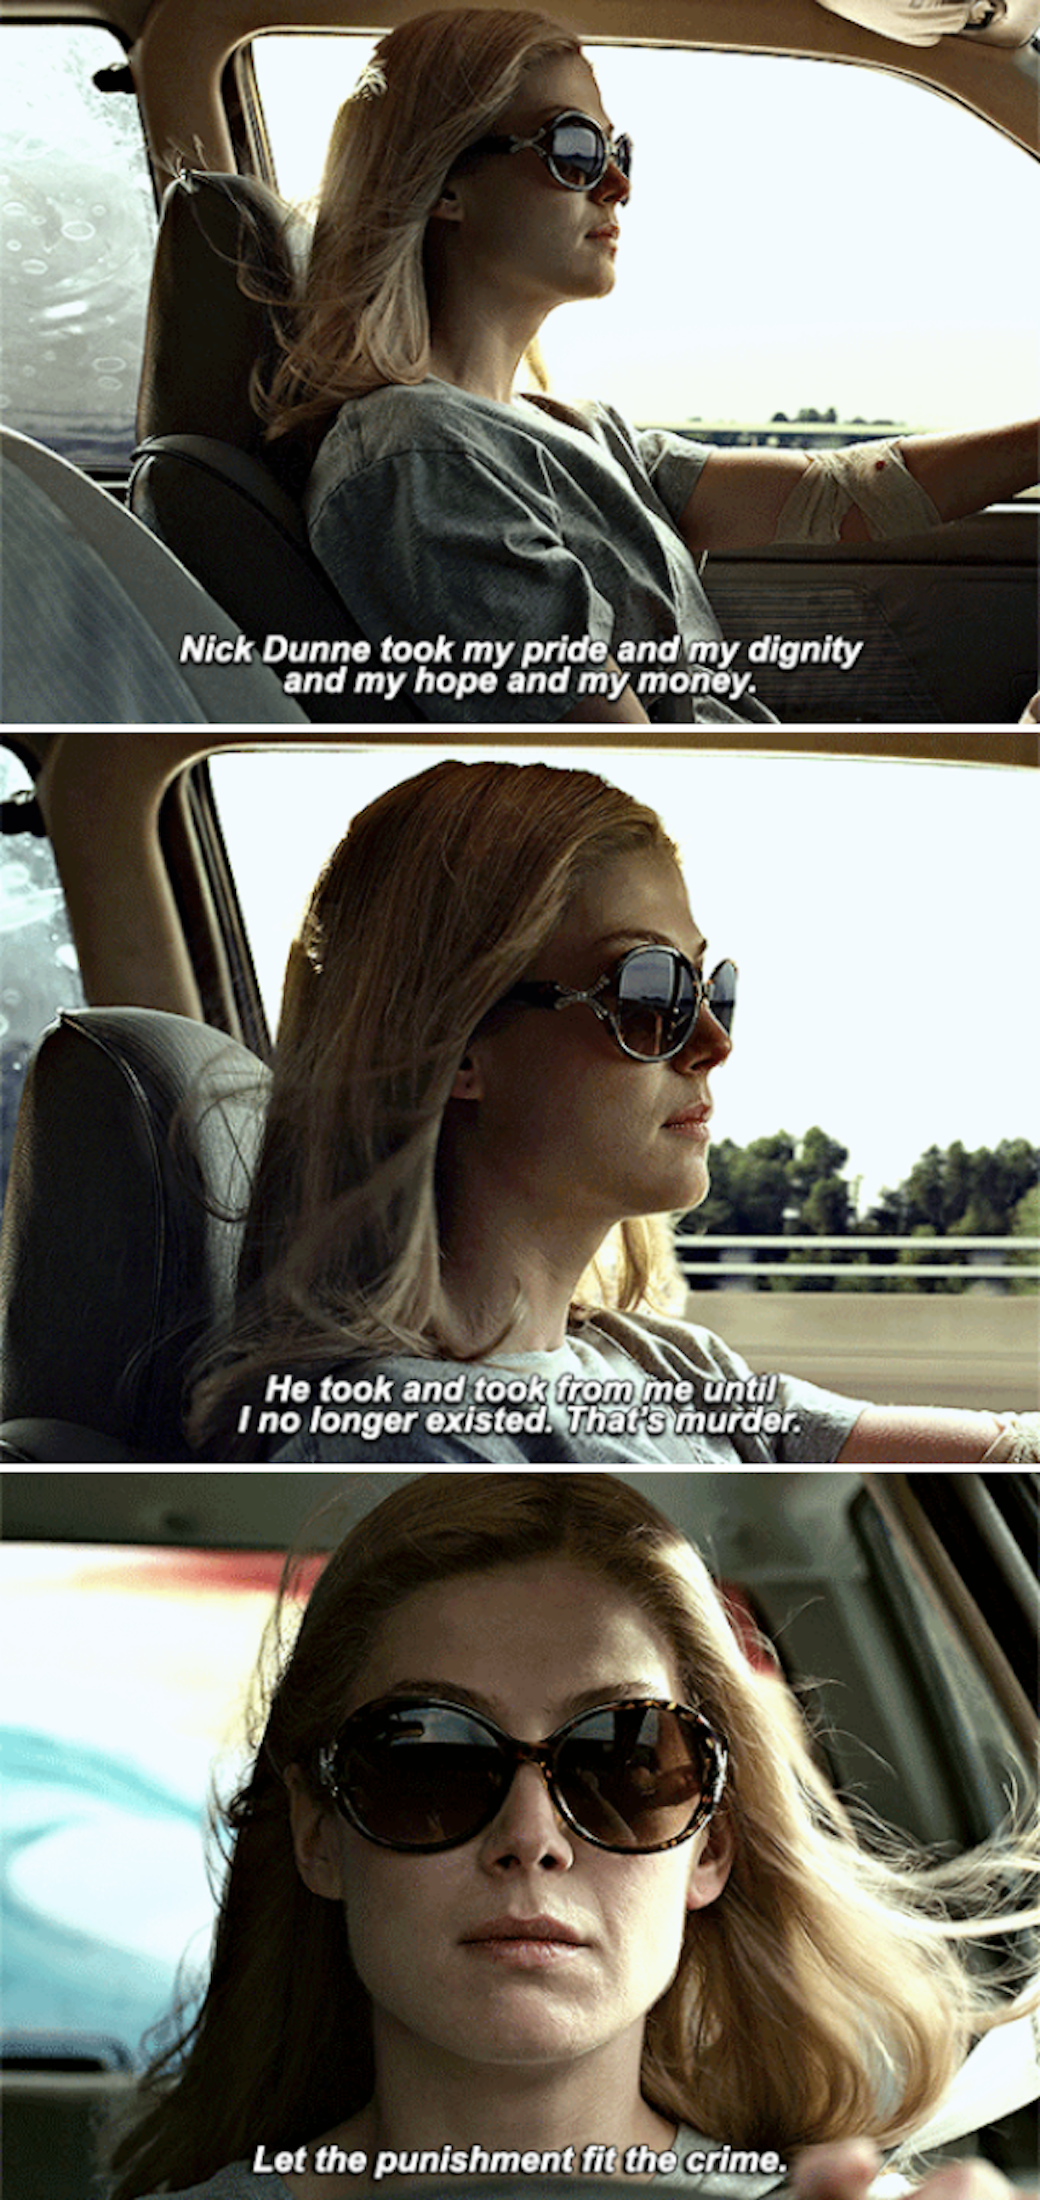 Amy&#x27;s monologue while driving in her car: &quot;Nick Dunne took my pride and my dignity and my hope and my money. He took and took from me until I no longer existed. That&#x27;s murder&quot;